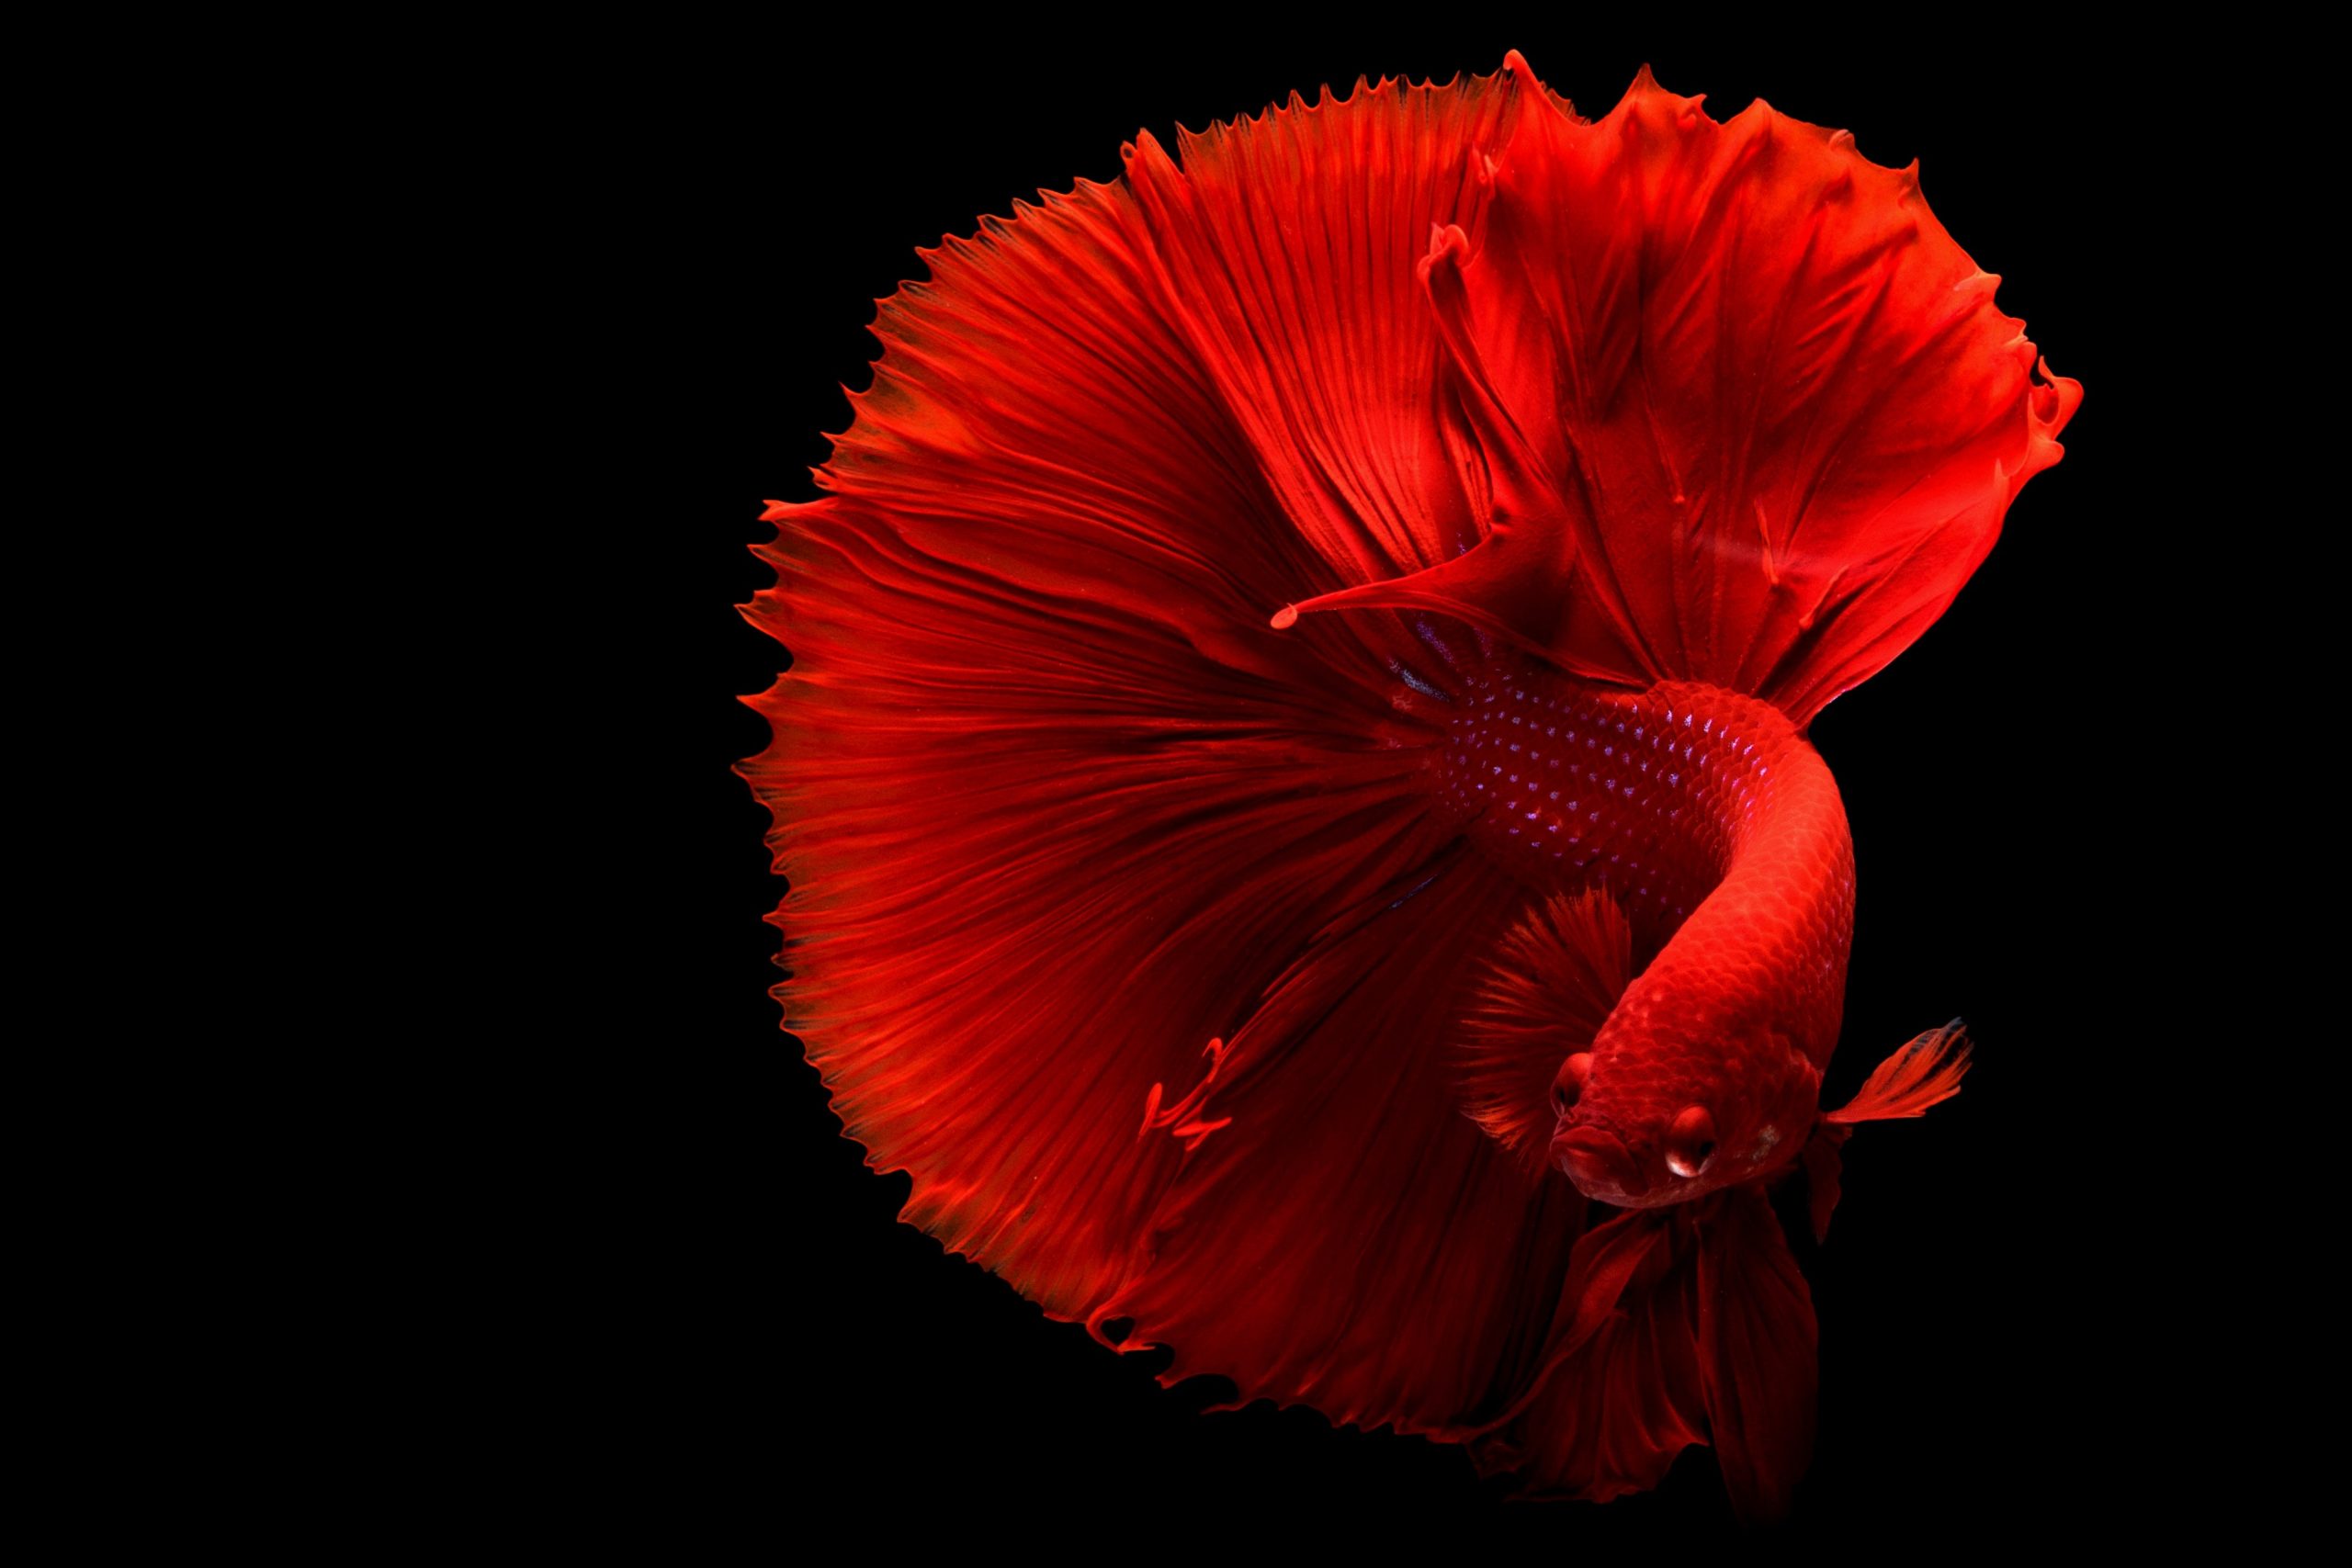 How to breed betta fish